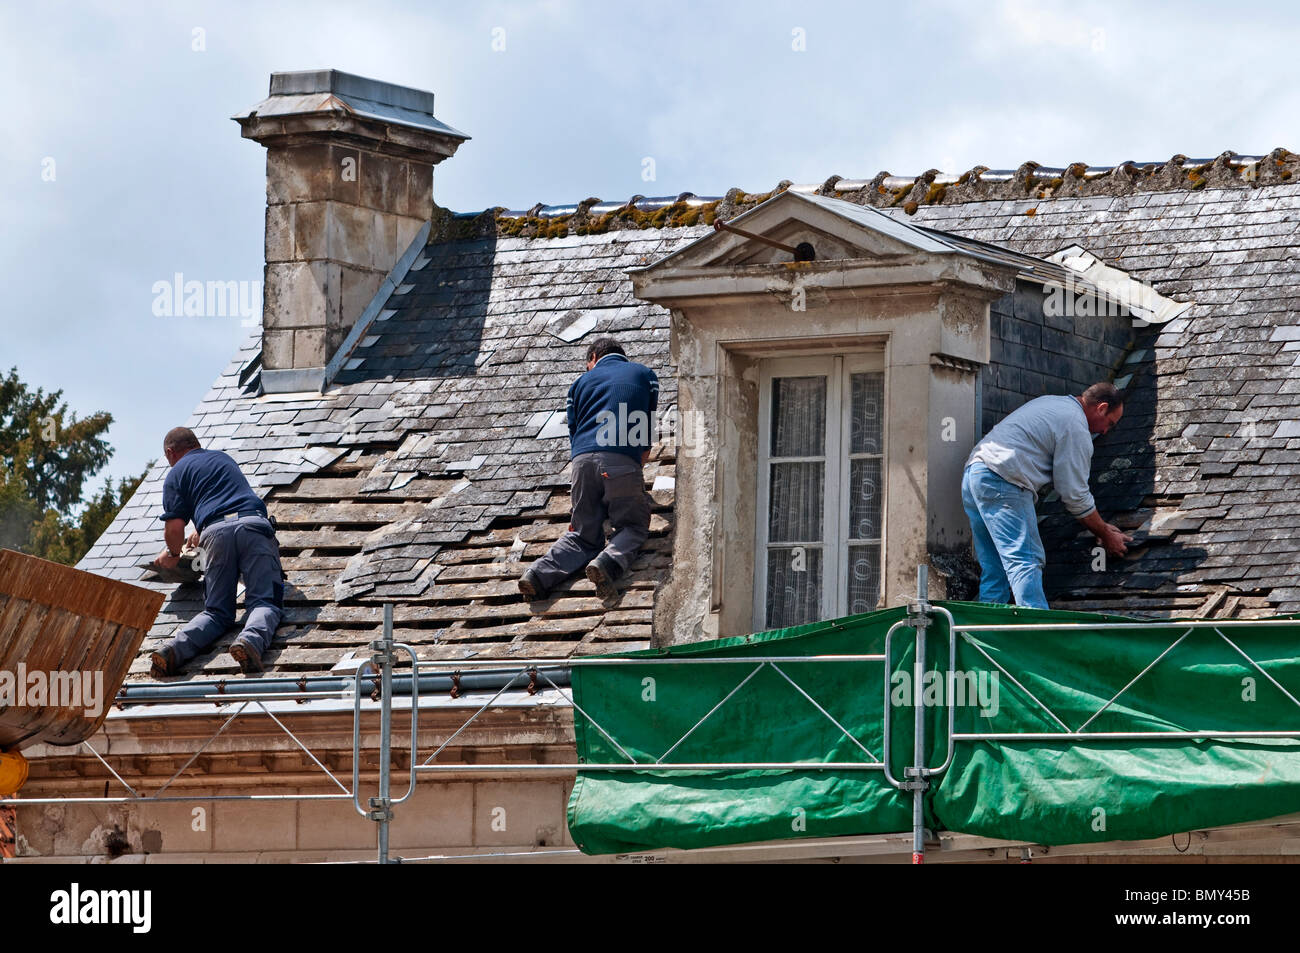 Workers on town house roof removing old slates / no safety